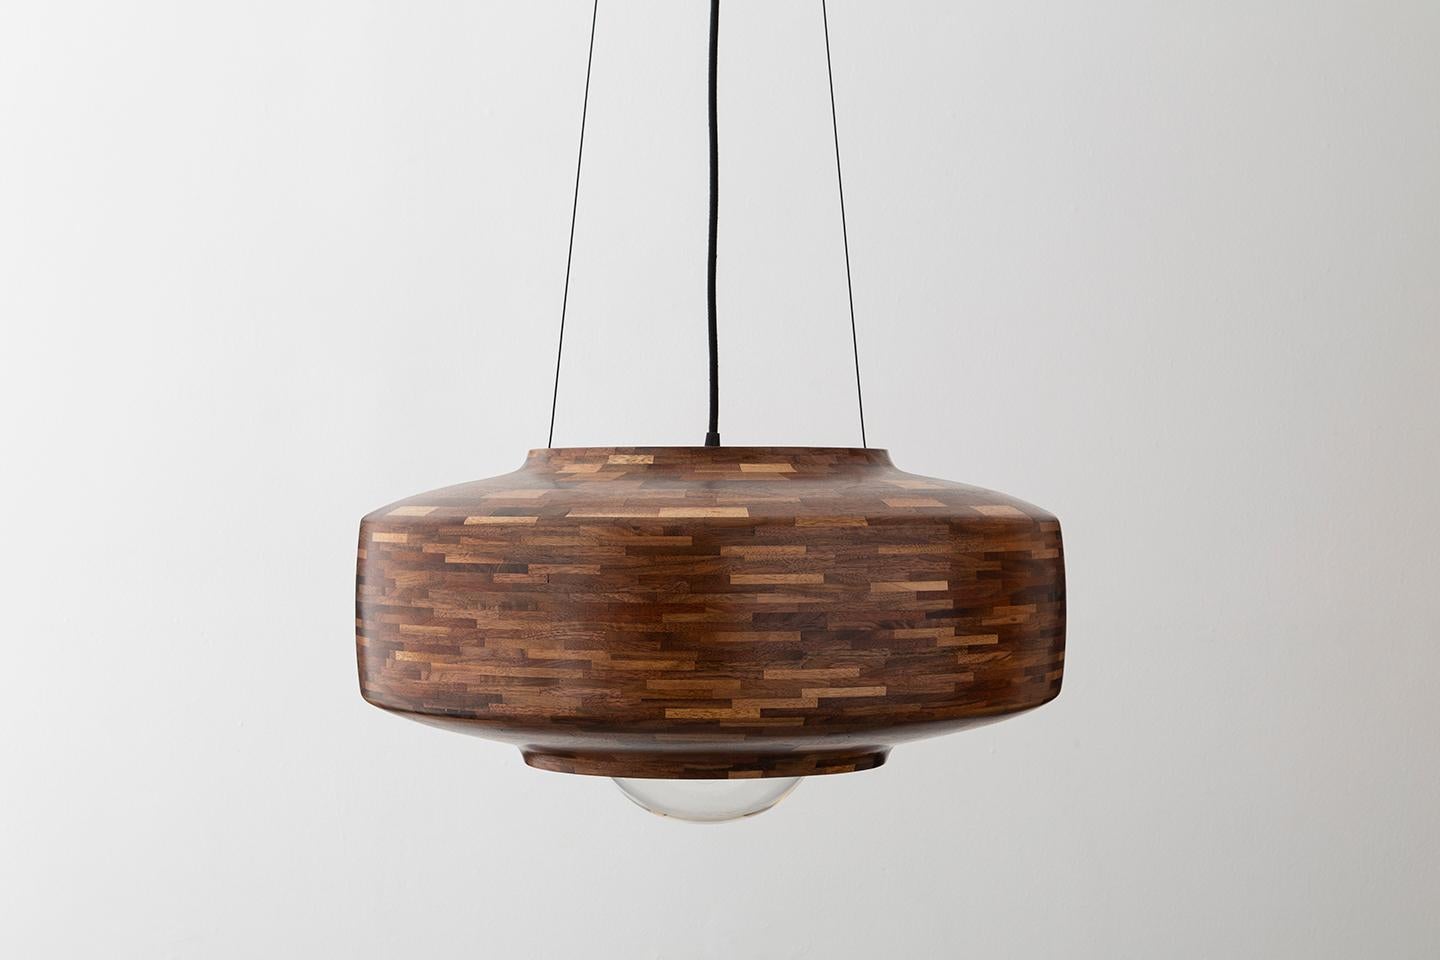 The STACKED Saucer Pendant lights are customizable in virtually any wood and any finish. The one's shown in this listing include Cherry and Walnut, both in a Natural Finish. However, Specialty Finishes are also available, such as Blackened,